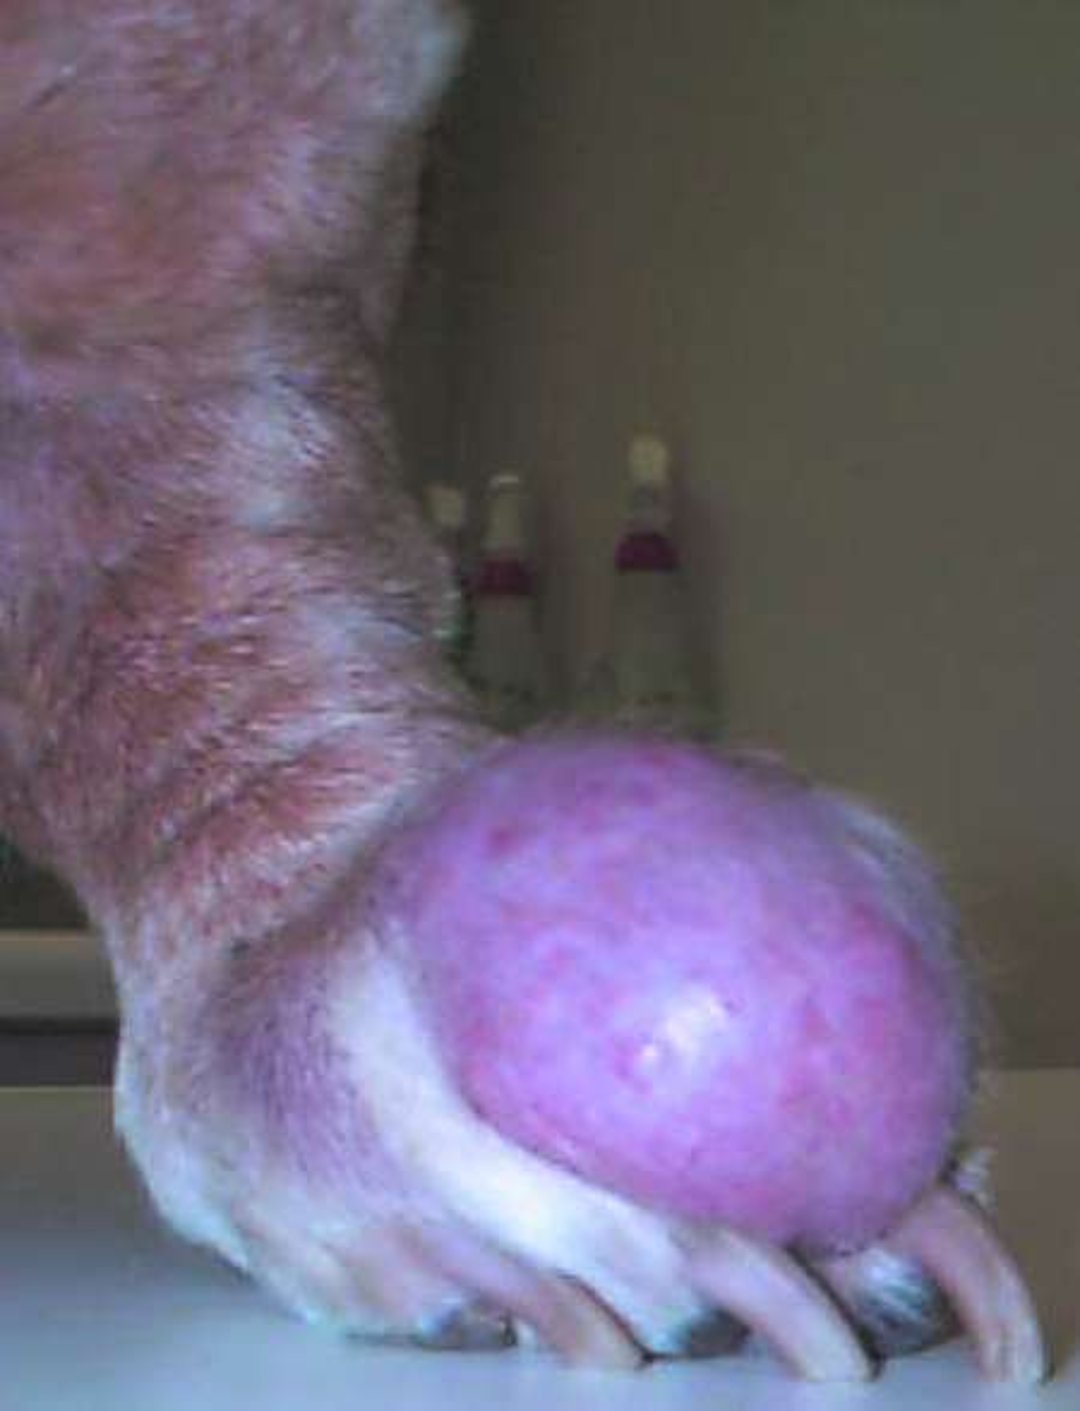 Mast cell tumor in hind foot, dog